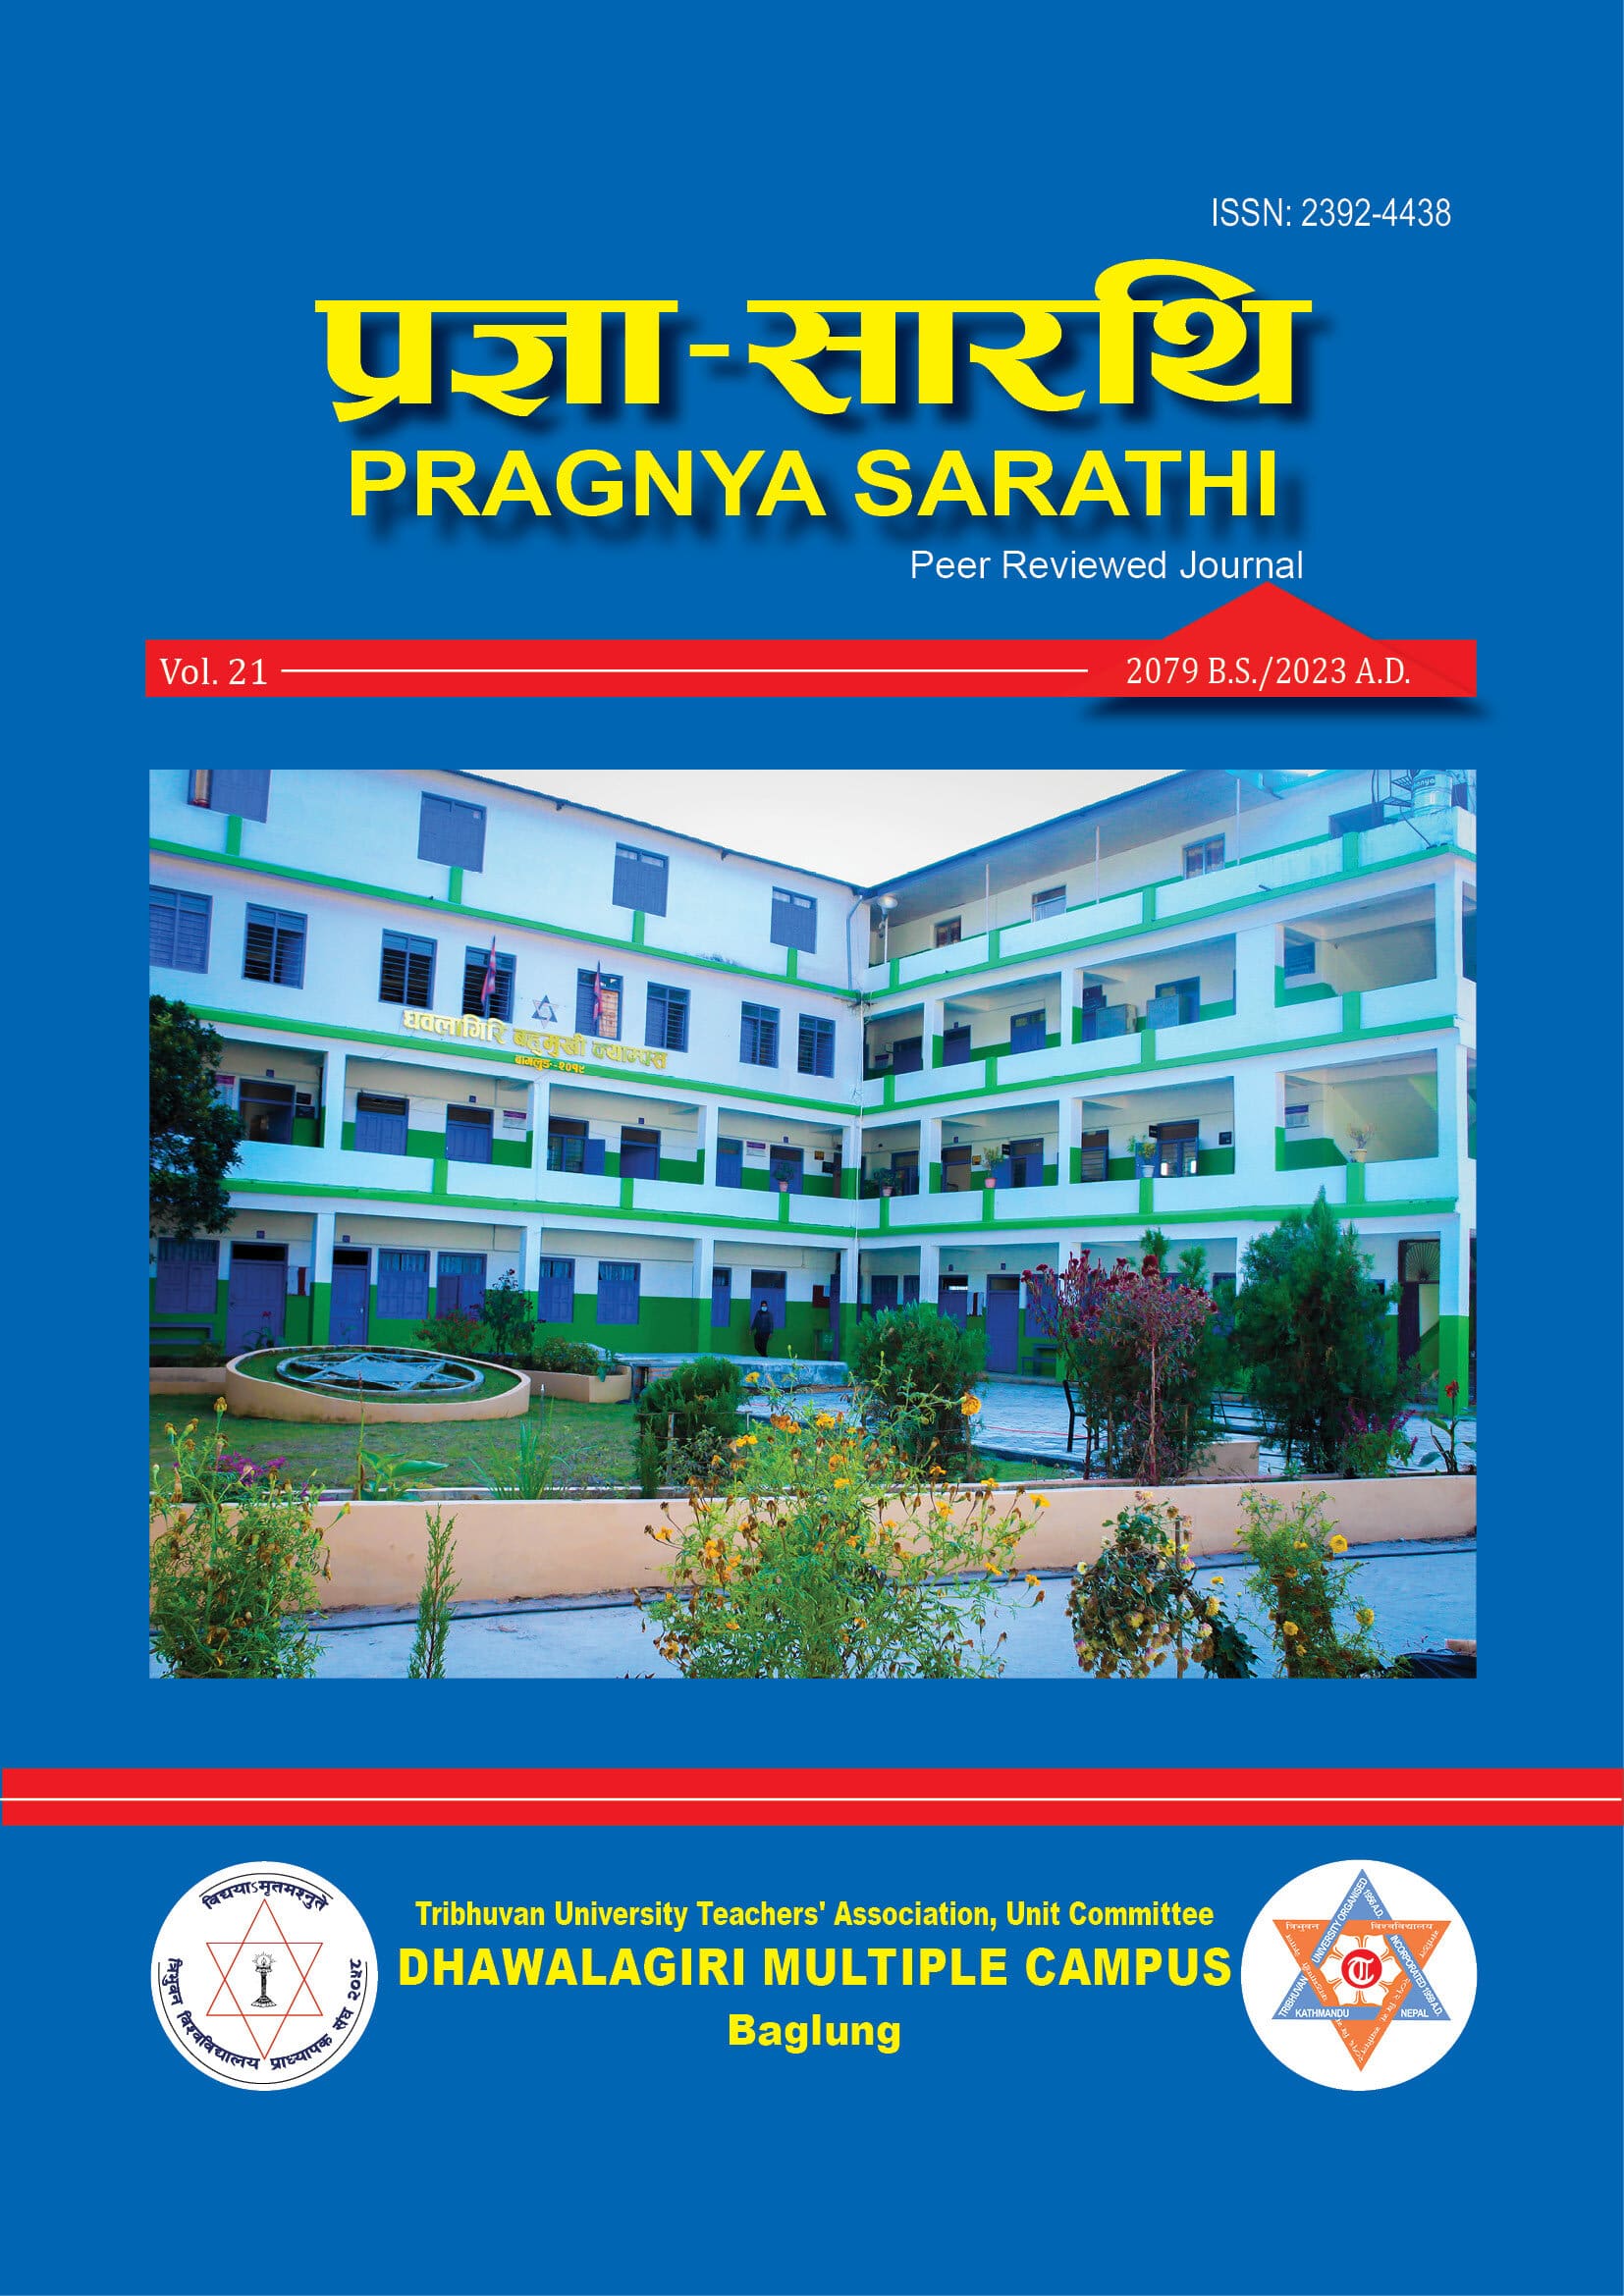 The image attached in the cover `is administrative building of Dhawalagiri Multiple Campus, TU. 